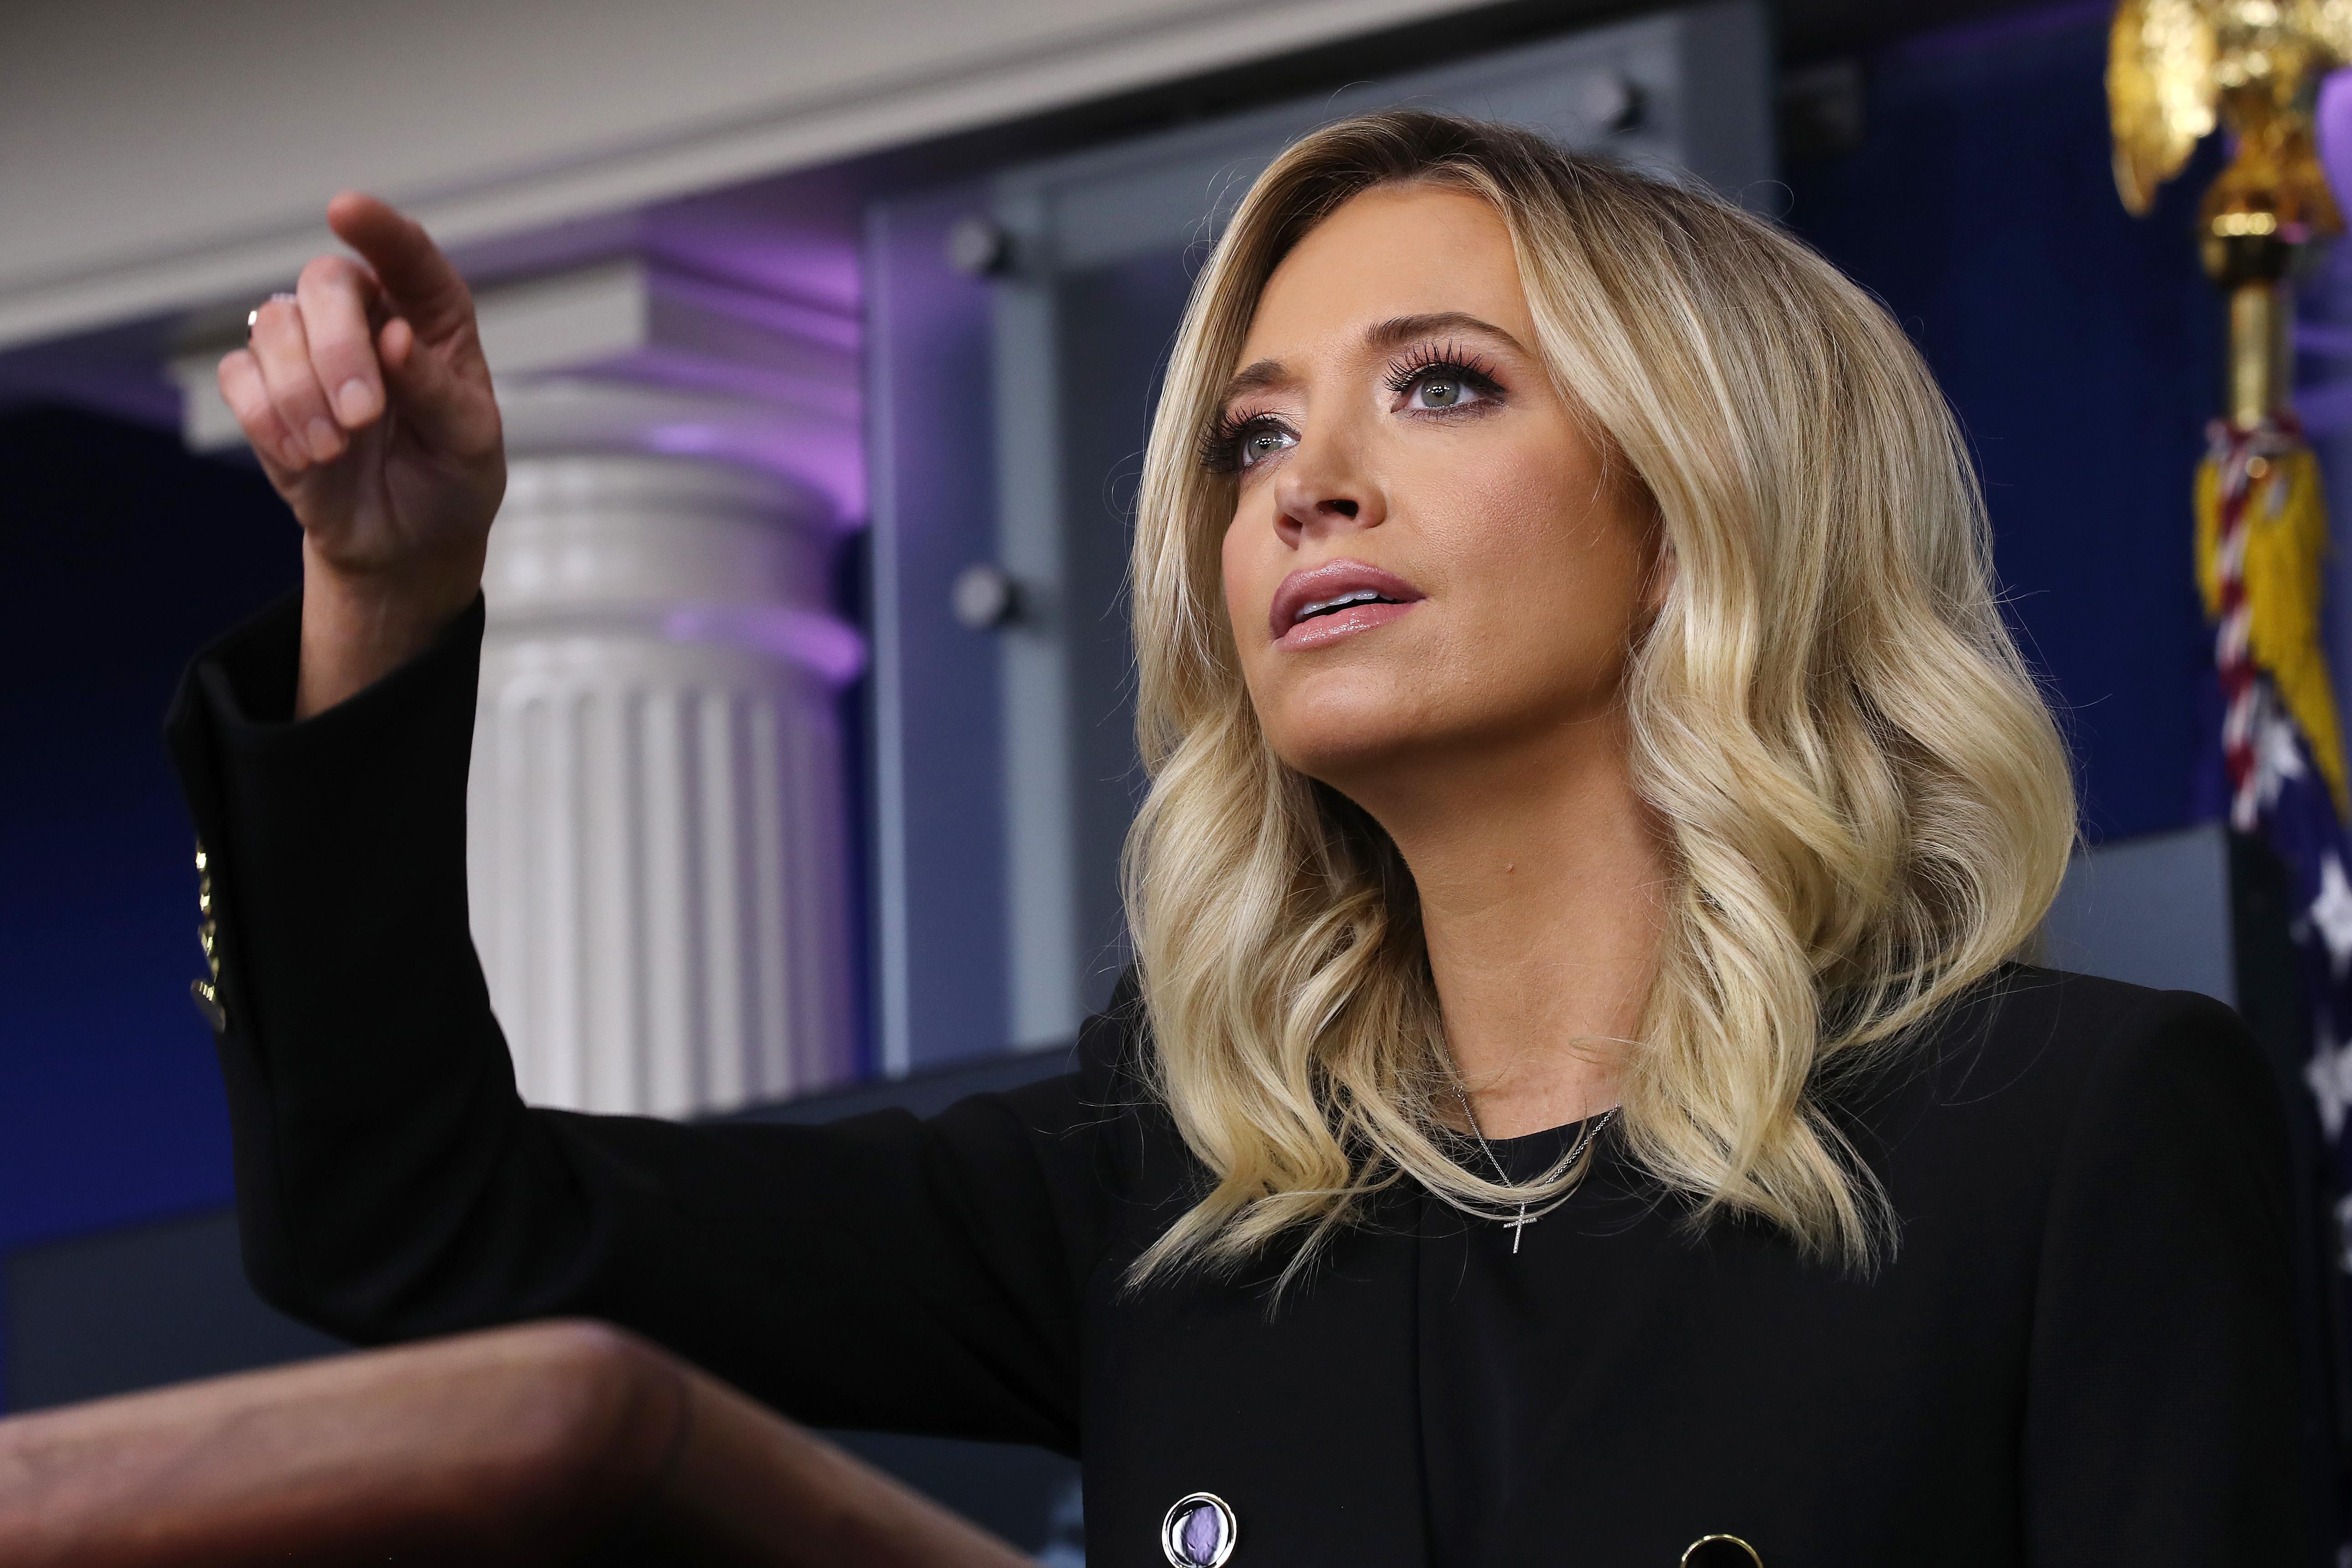 White House Press Secretary Kayleigh McEnany calls on reporters during her first on-camera news conference in the James Brady Press Briefing Room at the White House on May 1, 2020 in Washington, D.C. 